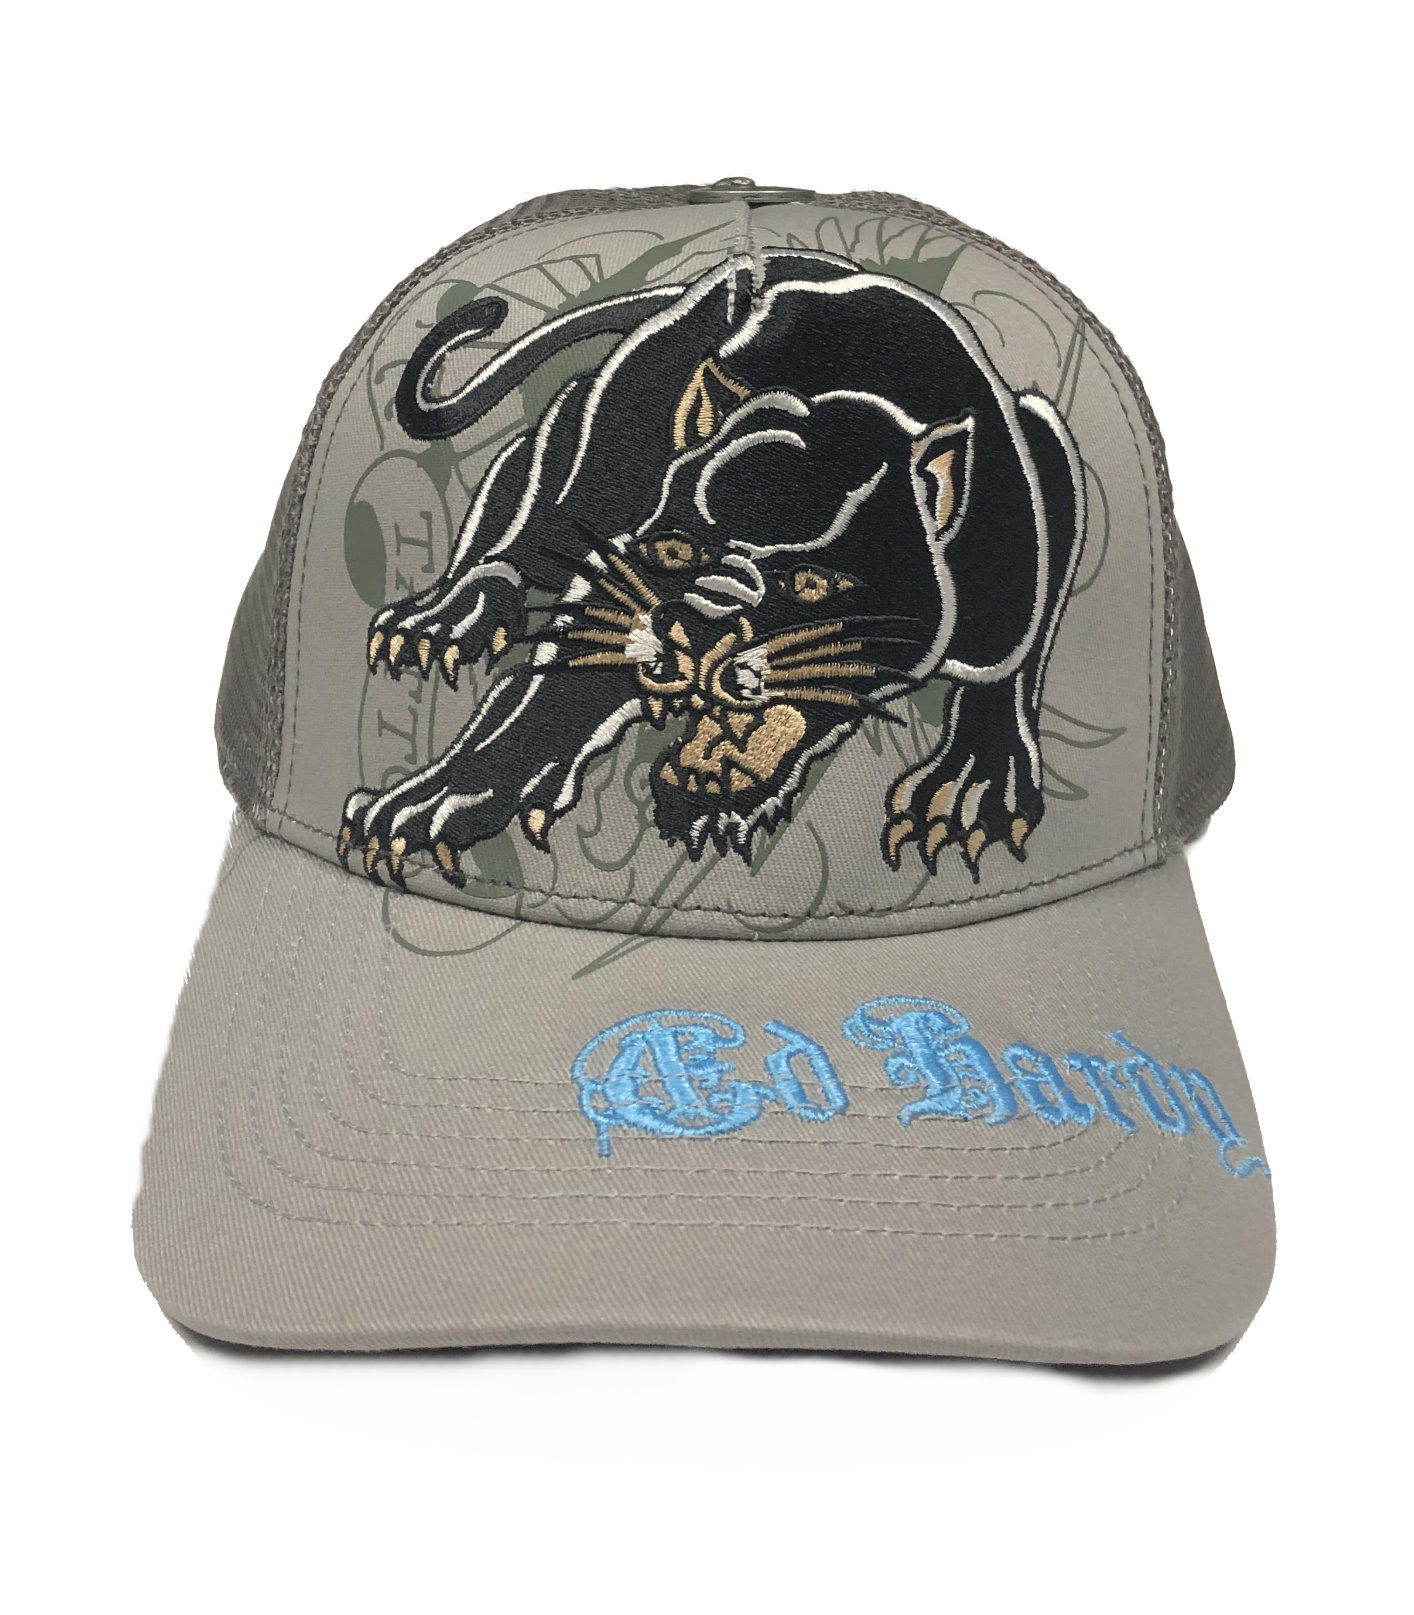 EDHARDY CROUCHING PANTHER TRUCKER HAT5